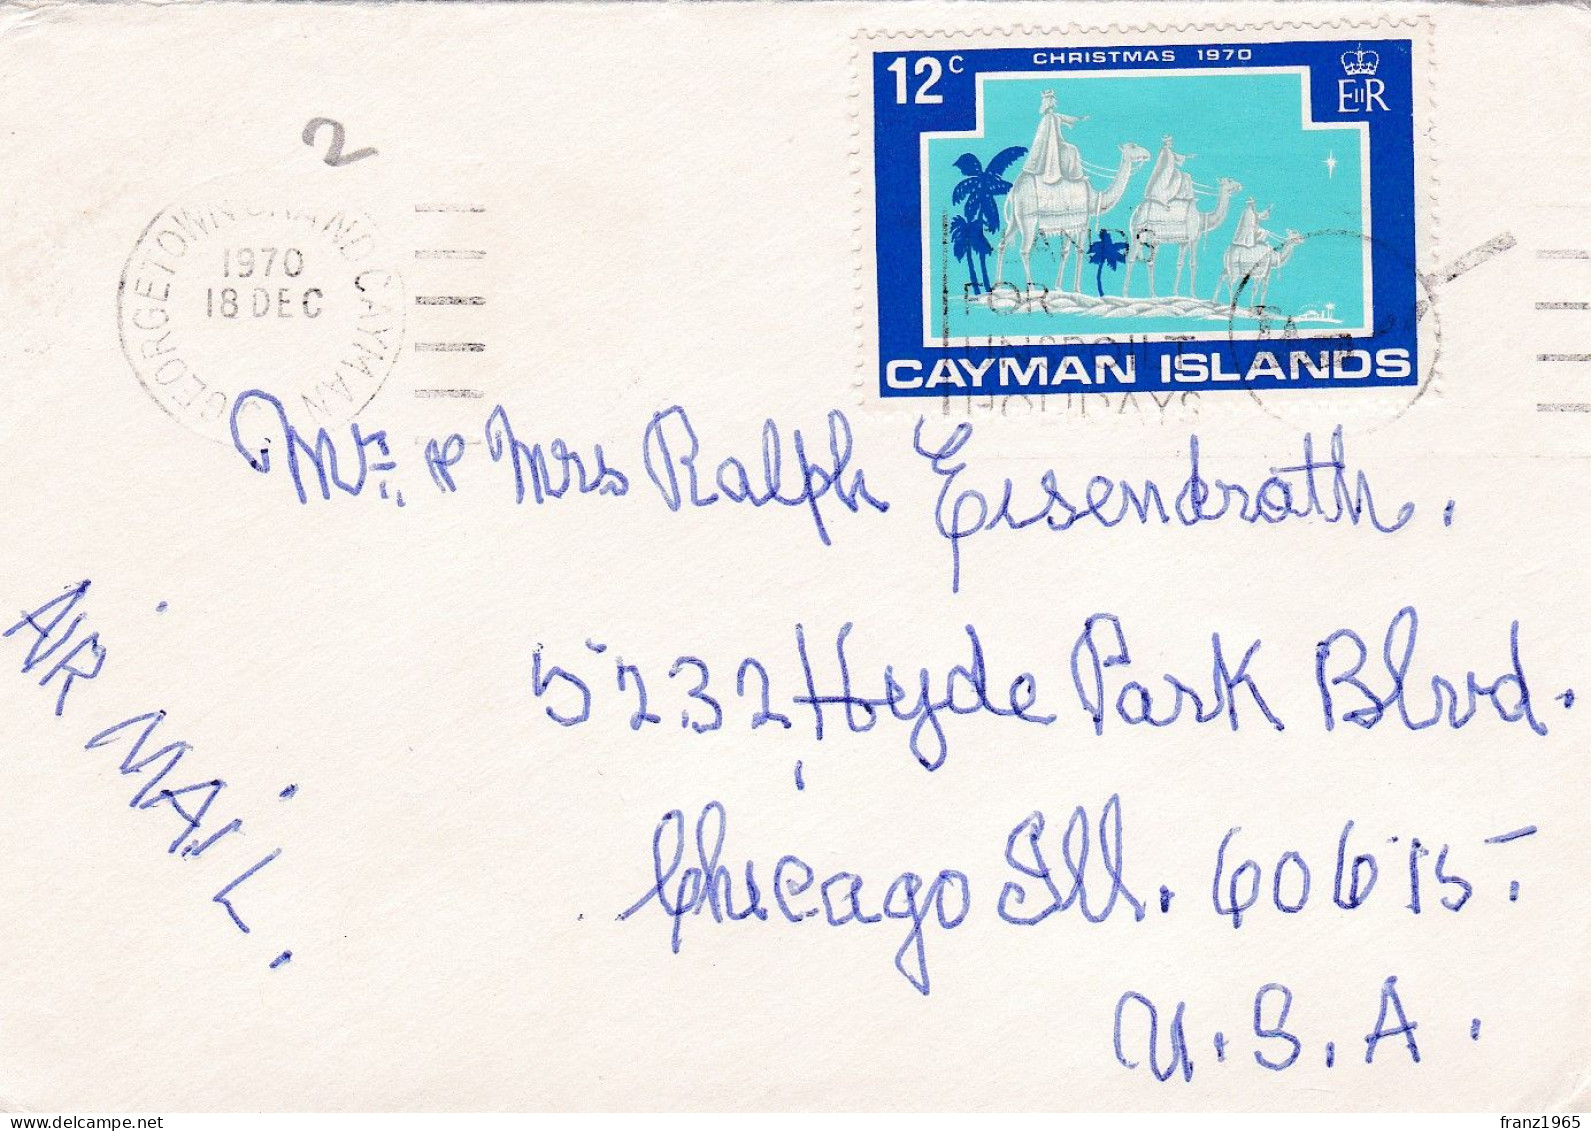 From Cayman Islands To USA - 1970 - Cayman Islands